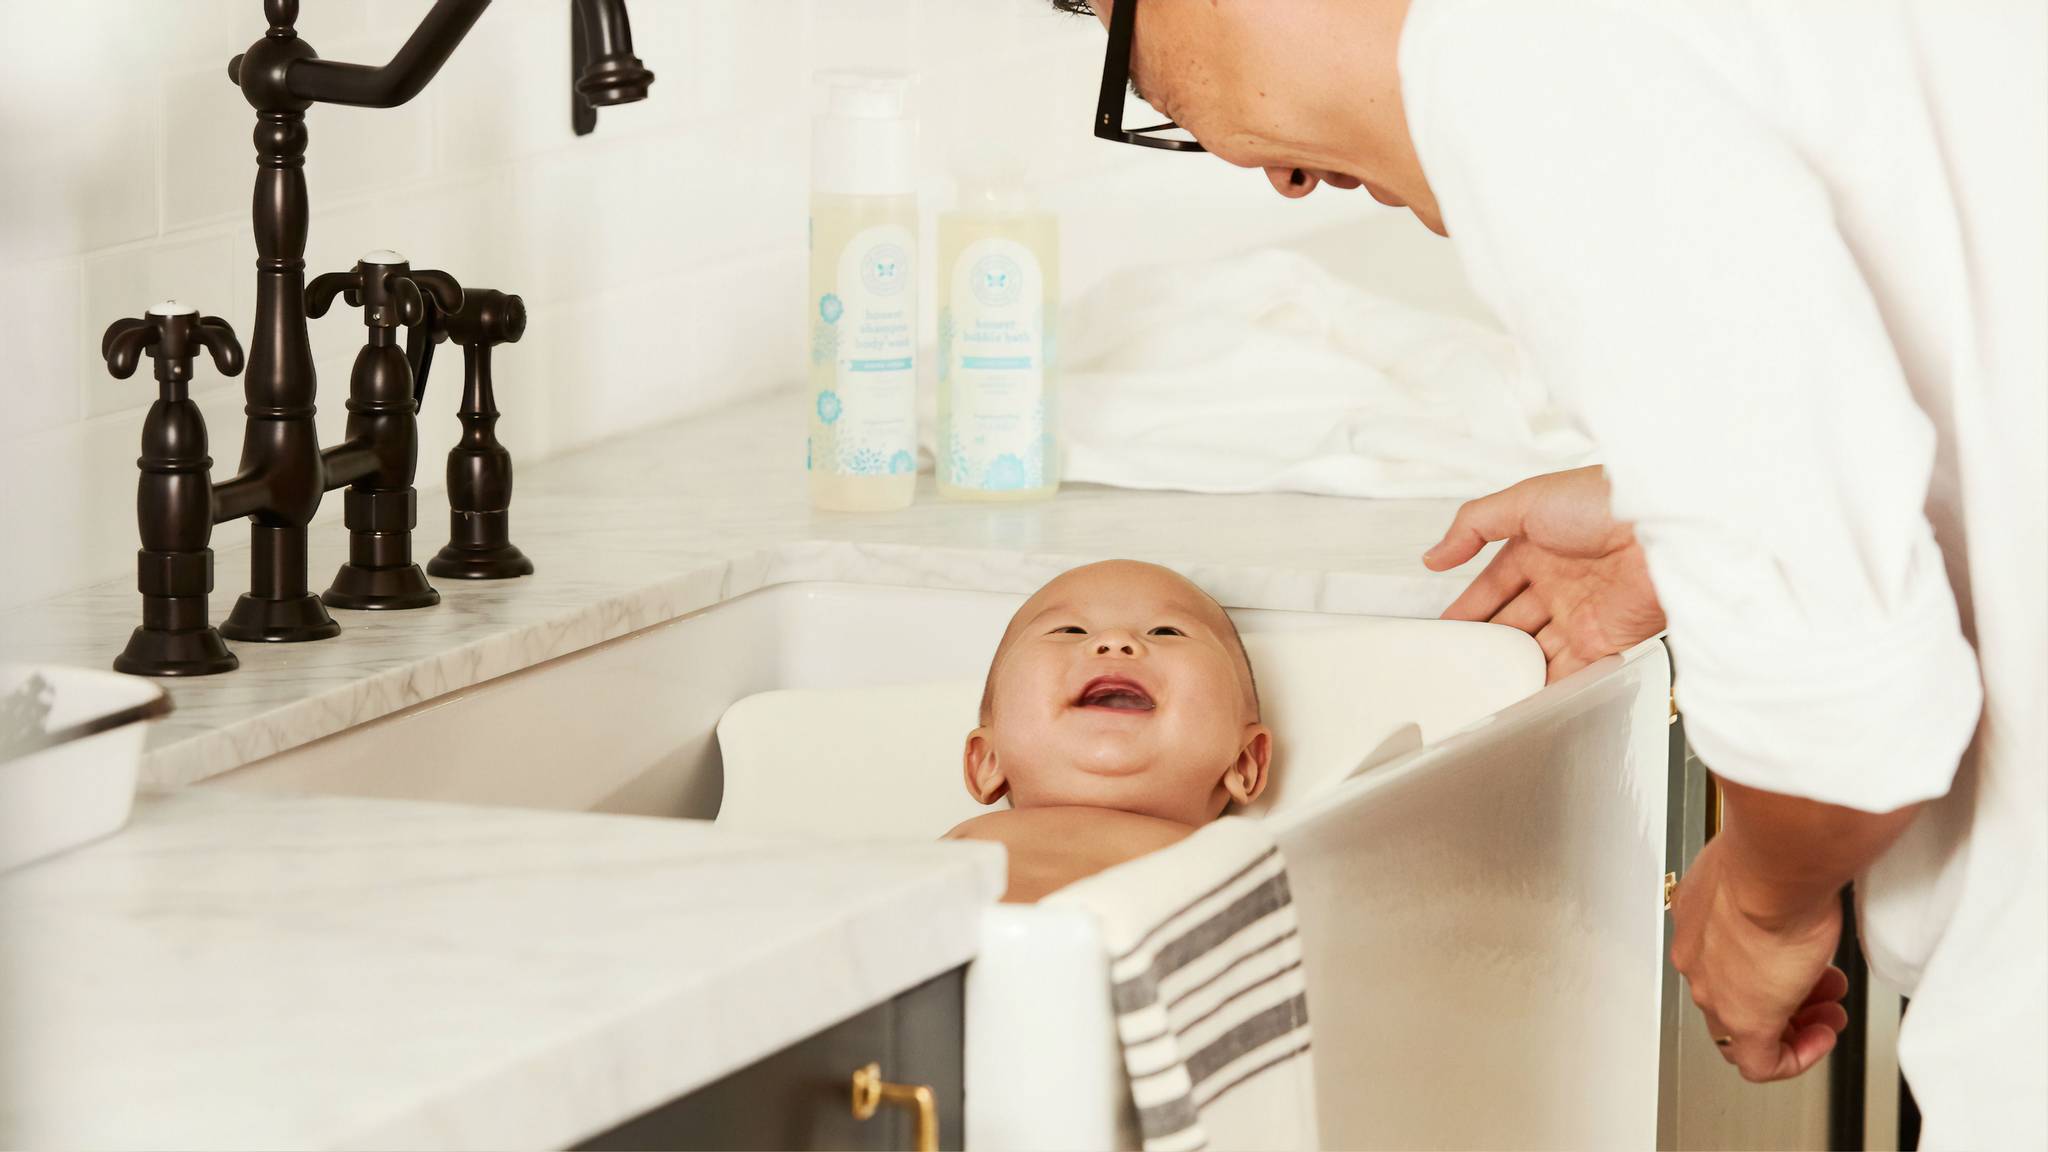 Why are Japanese dads not taking parental leave?